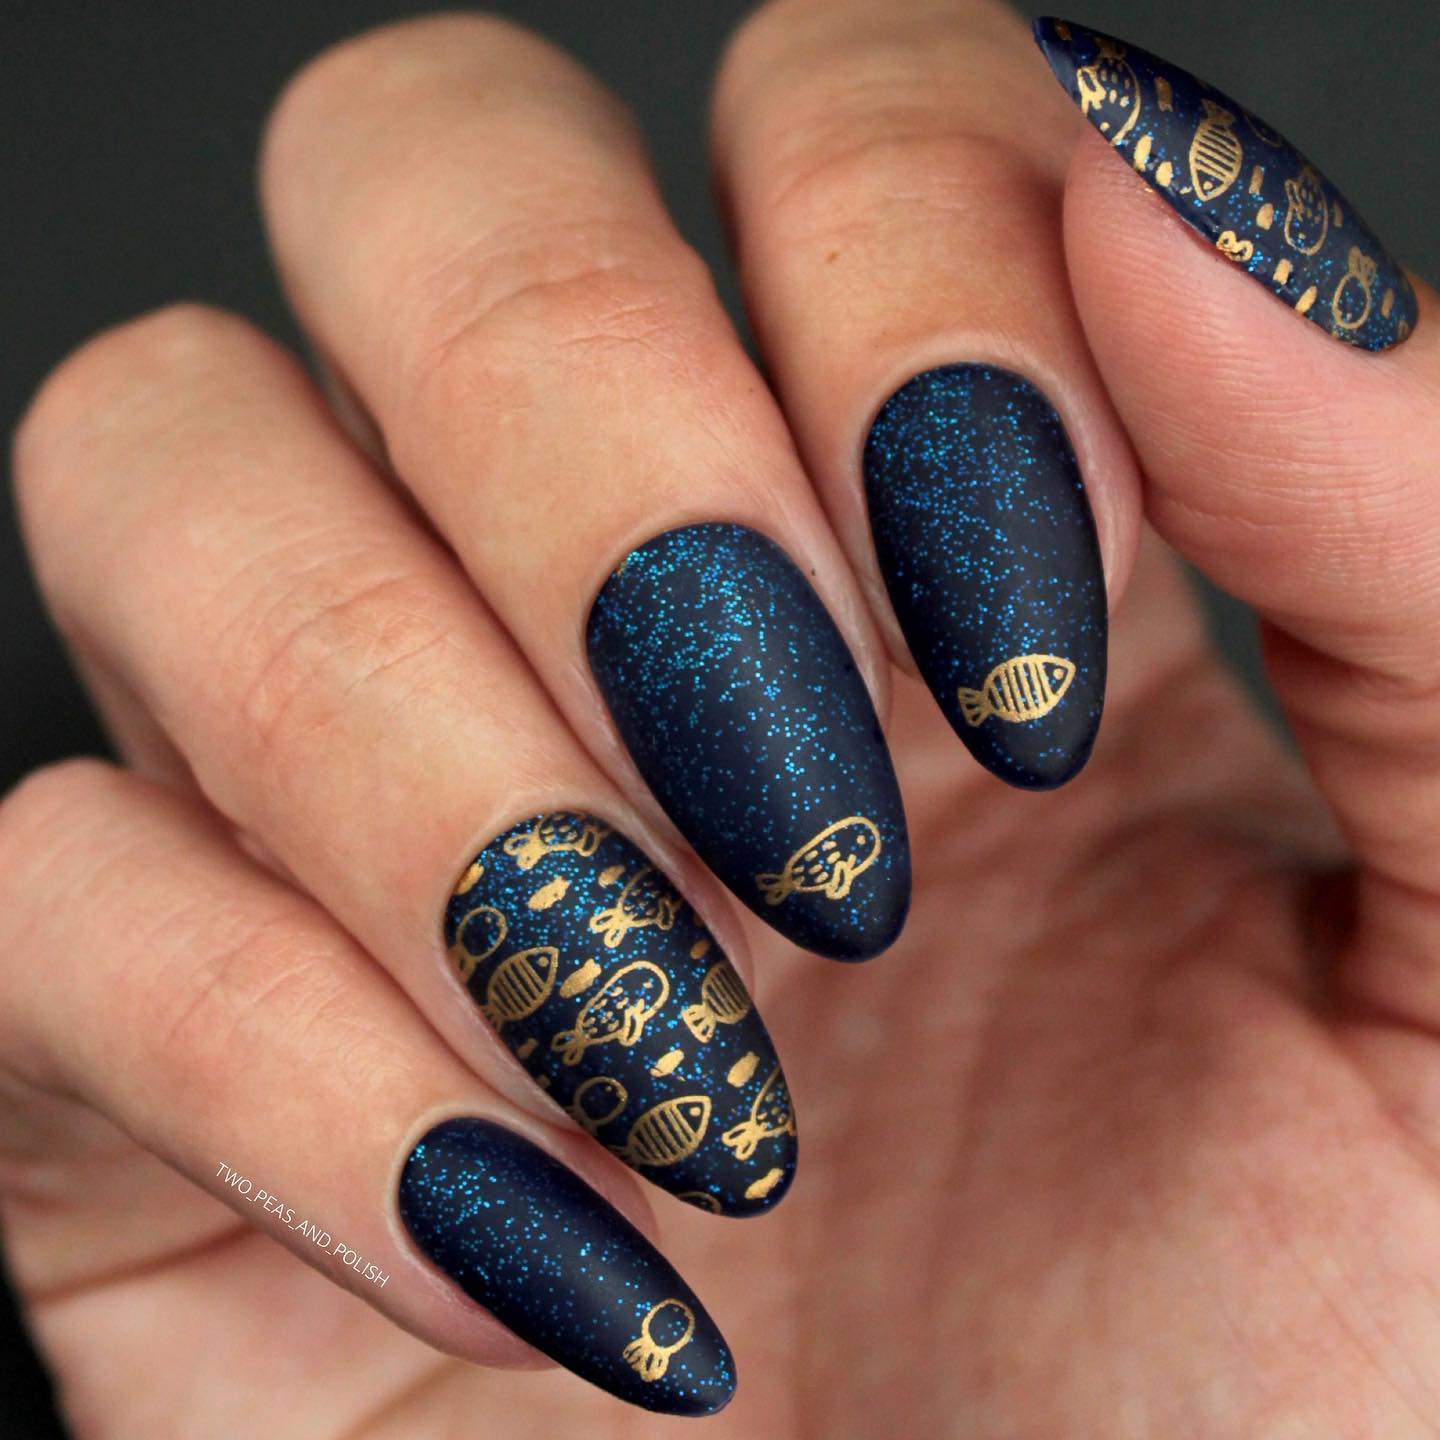 Black Almond Nails with Glitter and Gold Fish Design